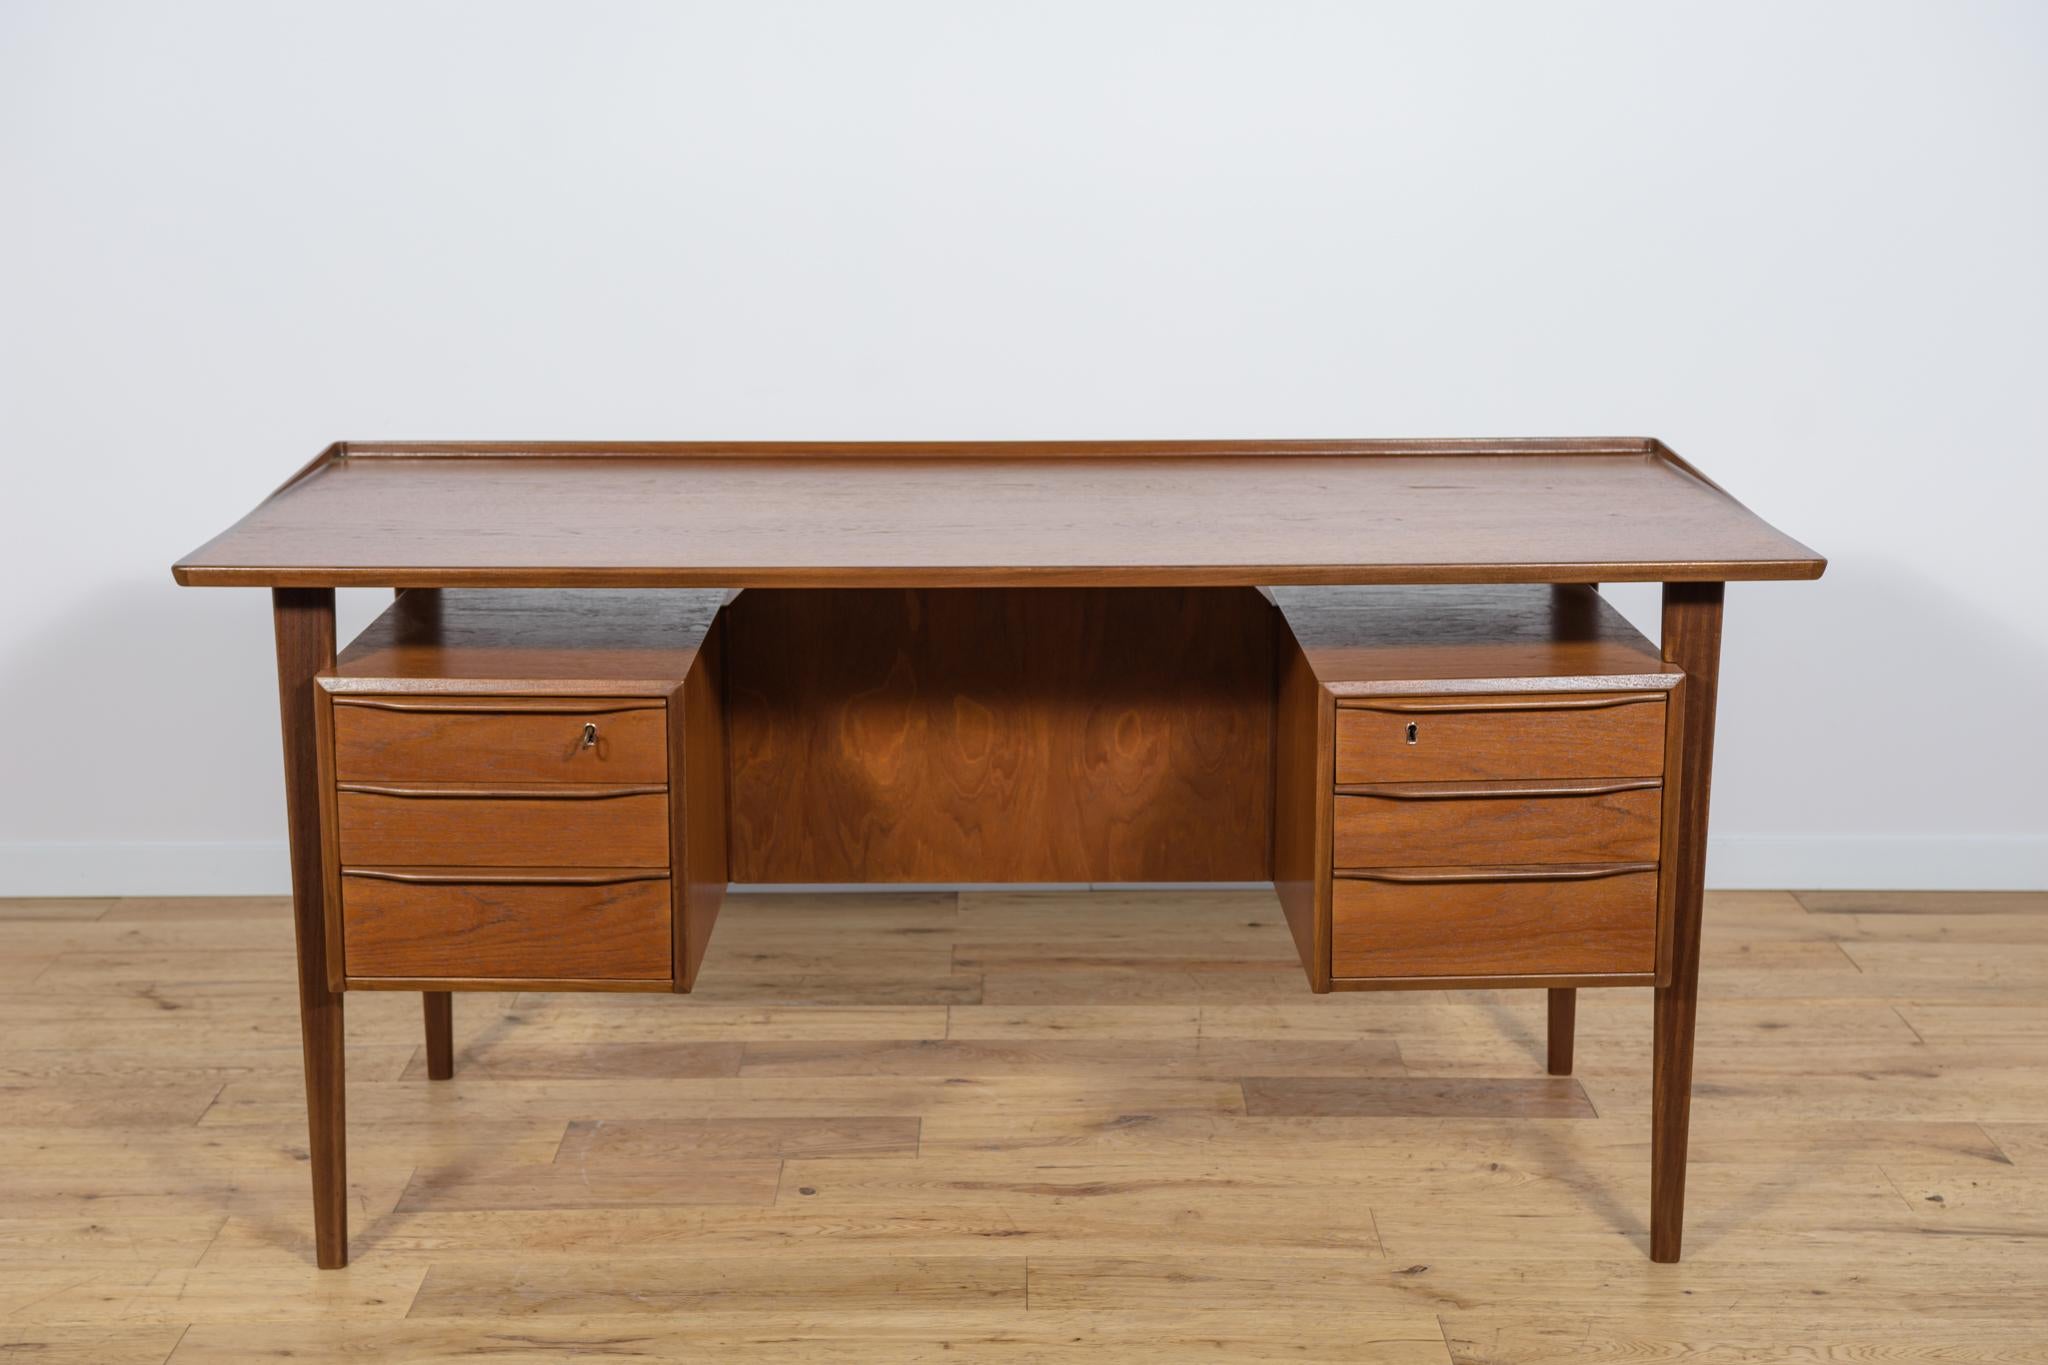 A desk designed by Danish designer Peter Løvig Nielsen in the 1960s. Desks are characterized by original, extraordinary design and high-quality workmanship made of high-quality materials. The desk has a top with a contoured edge. The desk is made of